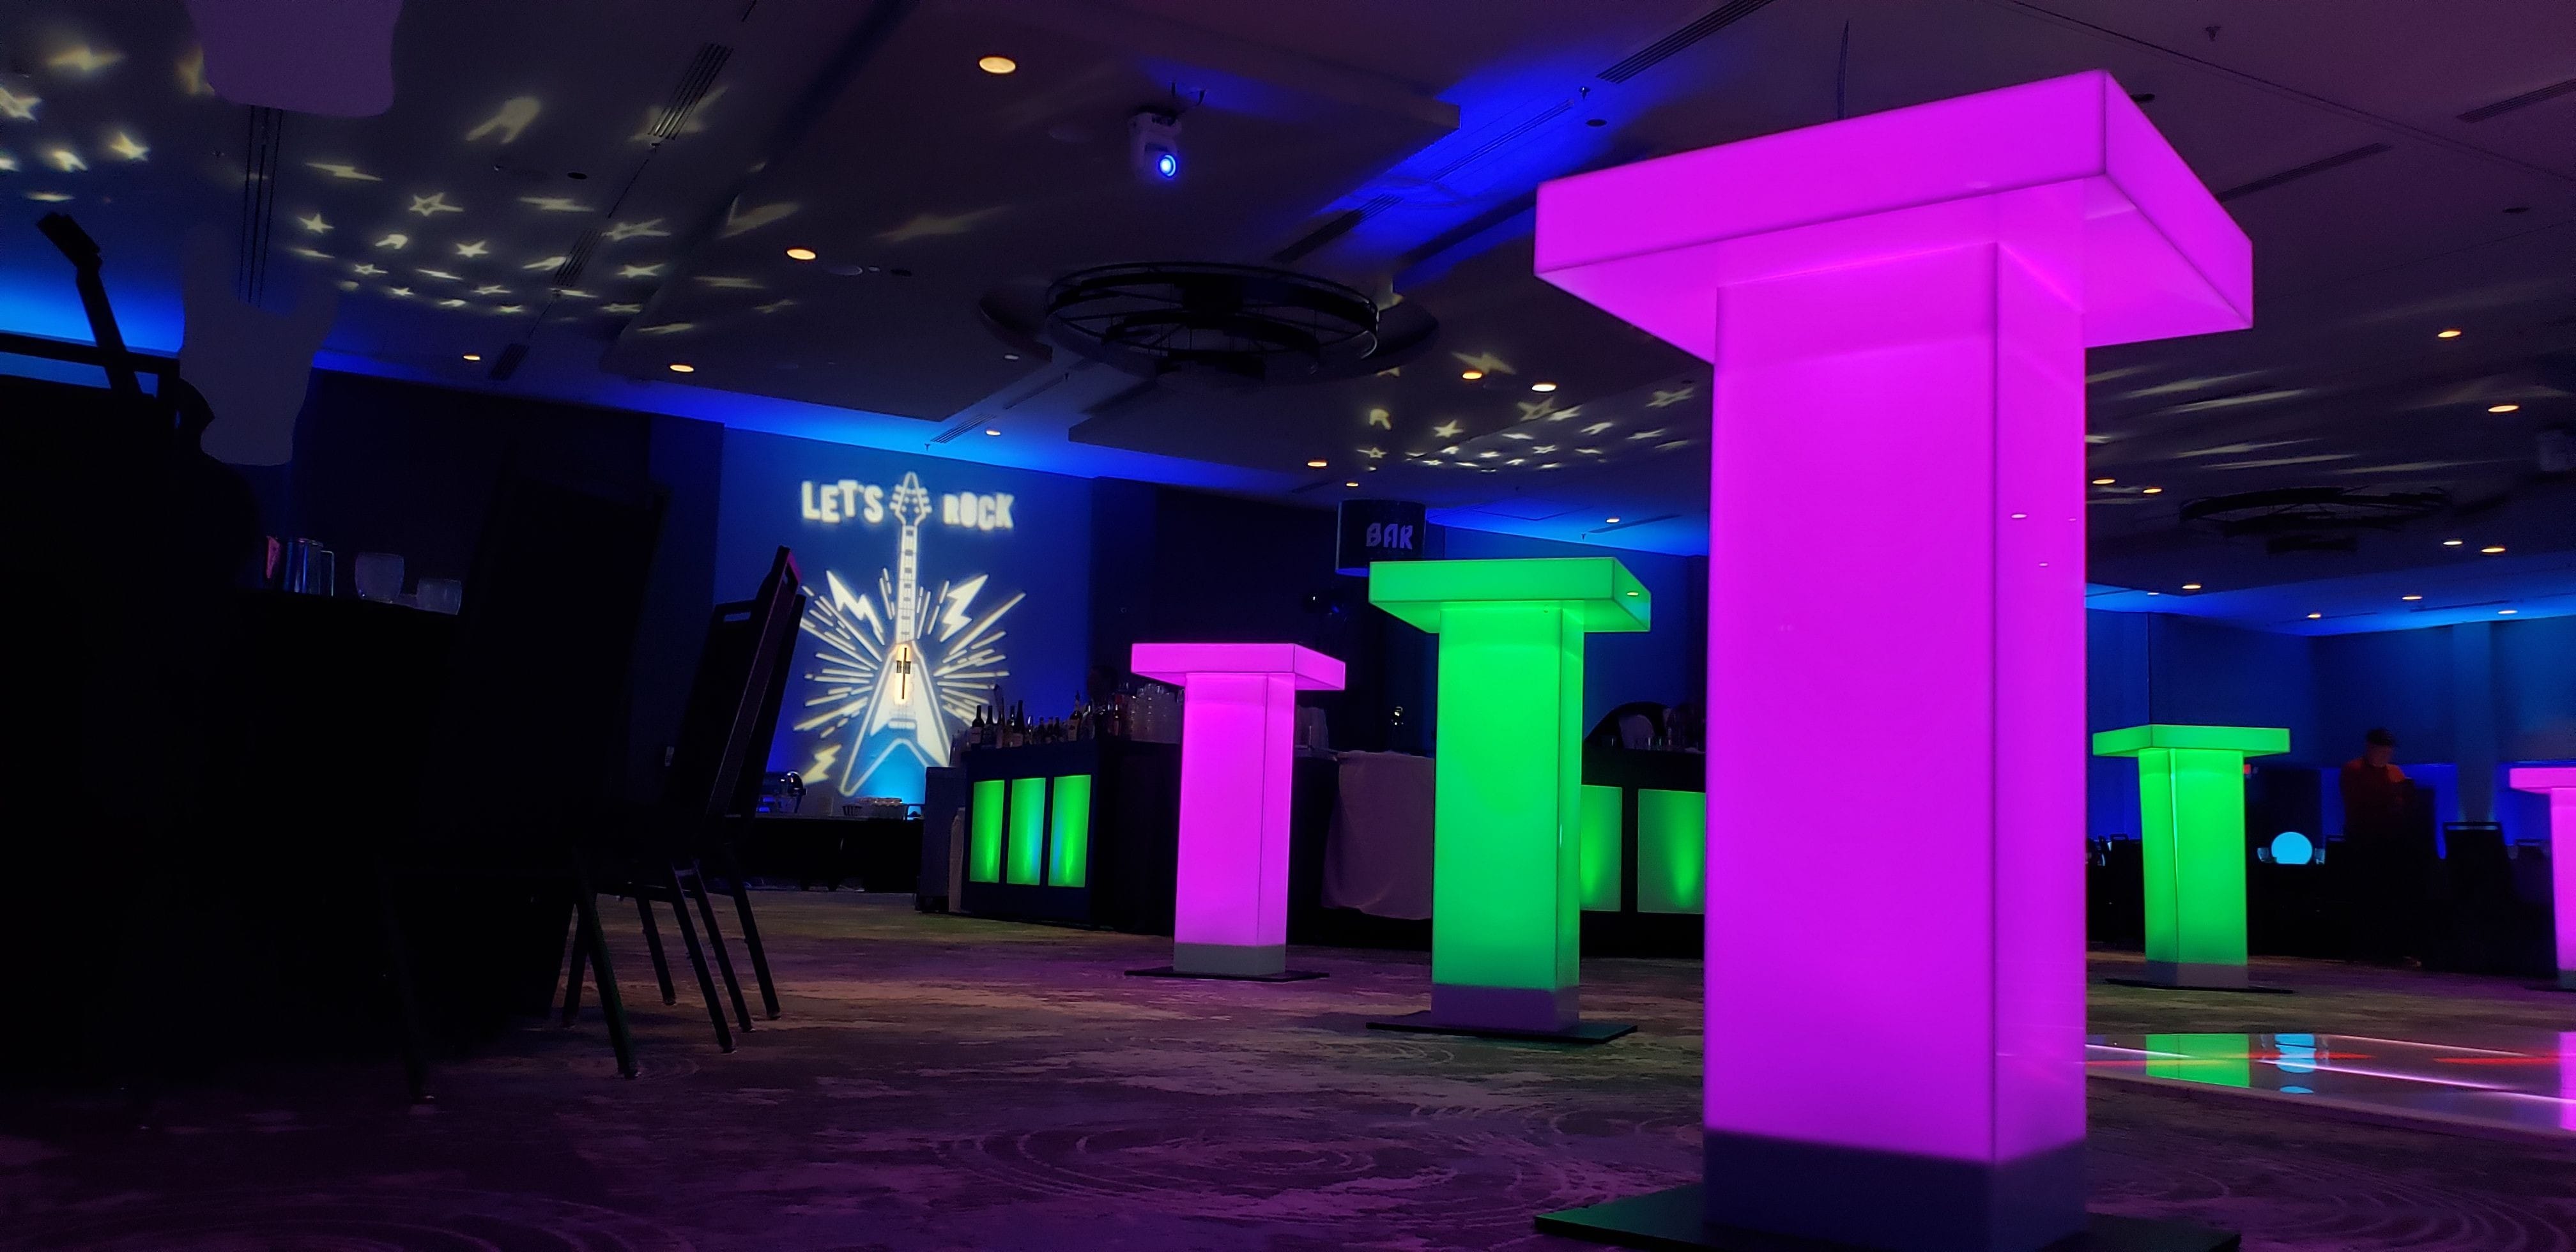 Let's Rock themed party with neon glowing cocktail tables.